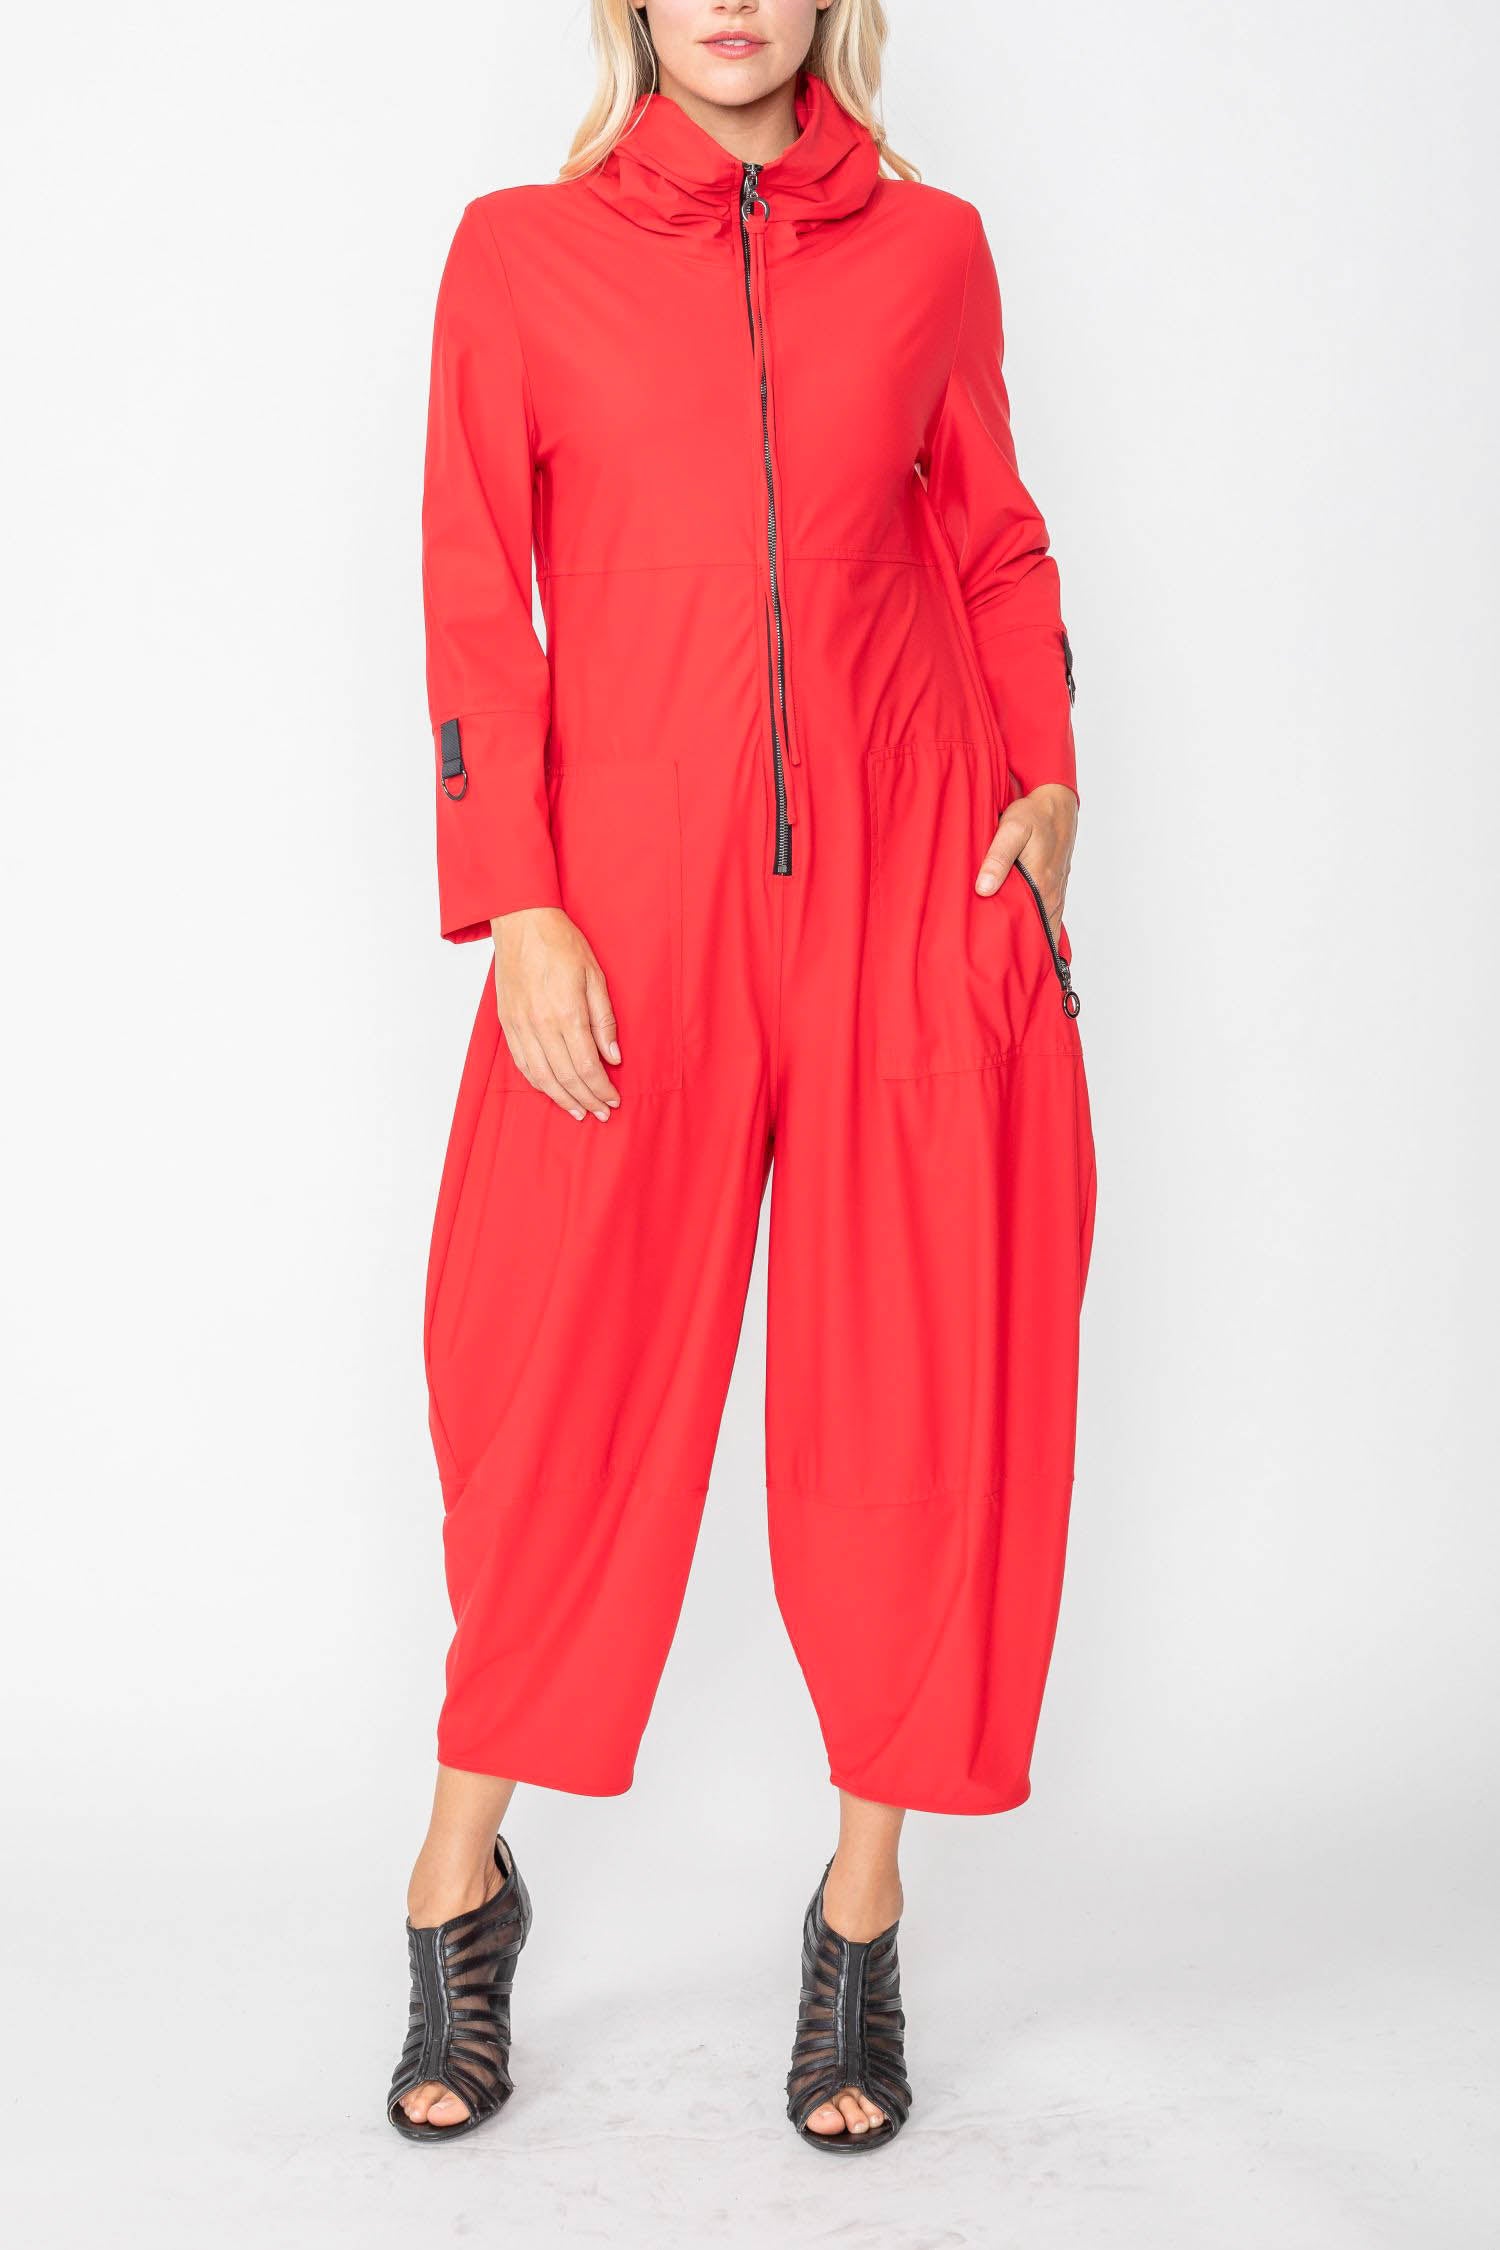 Red Zip-Up Front Cropped Long Sleeve Jumpsuit